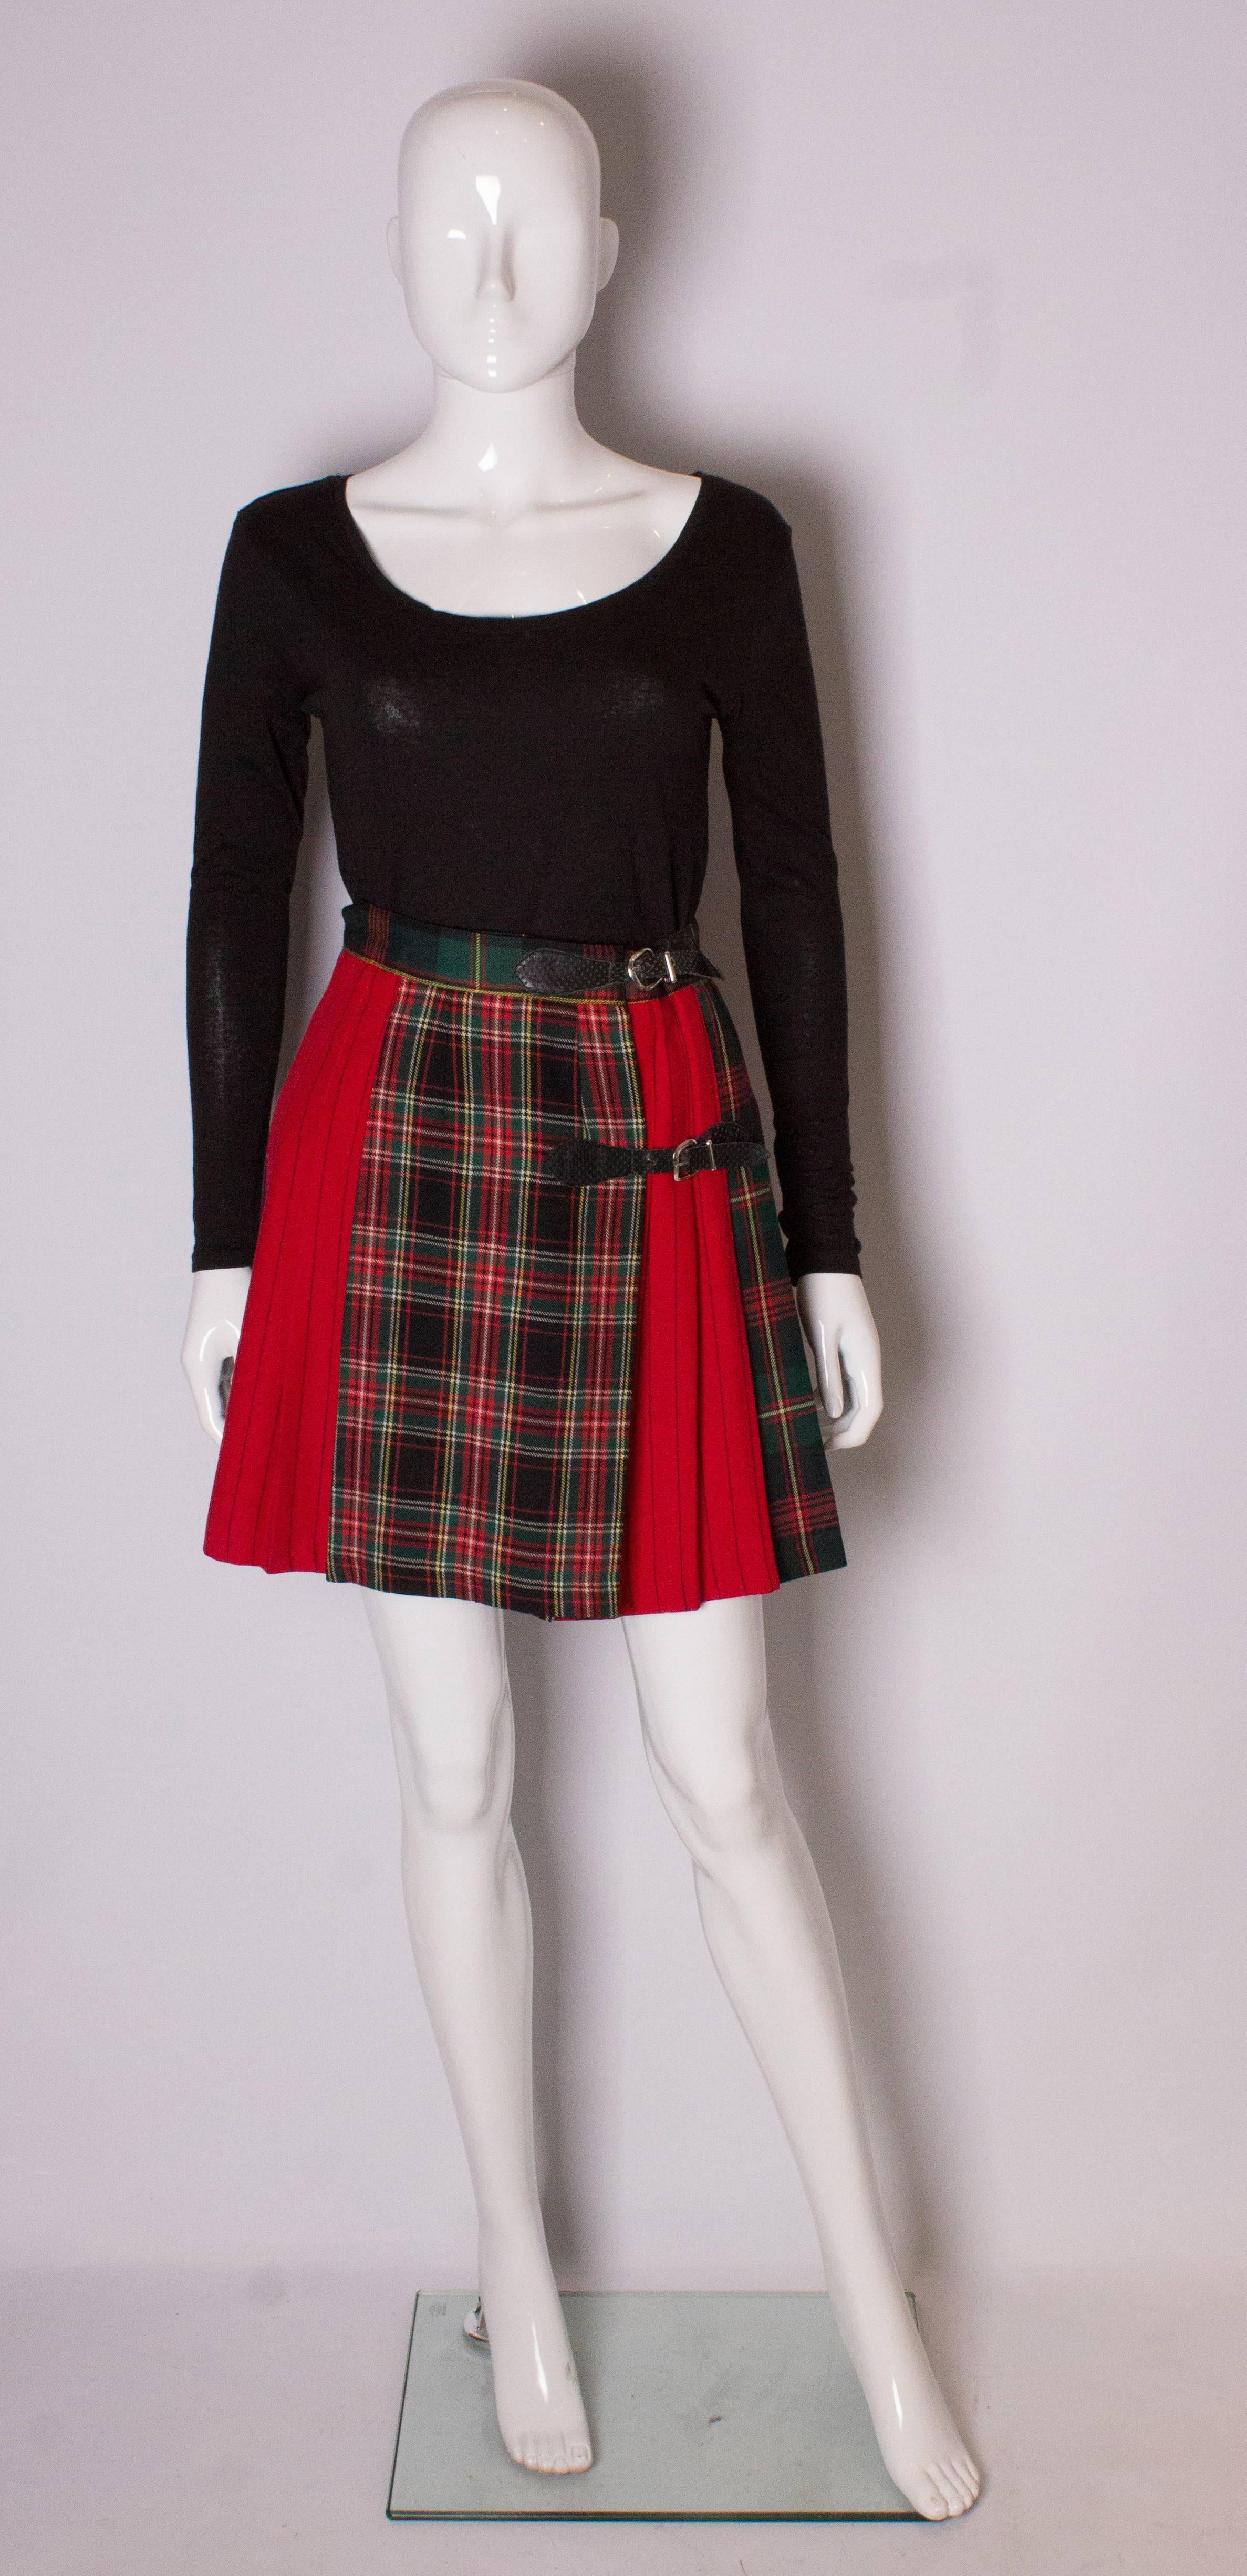 A great mink skirt kilt in a mix of stripe and tartan fabric. The pleats start at hip level , leaving a smooth line down from from the waist.